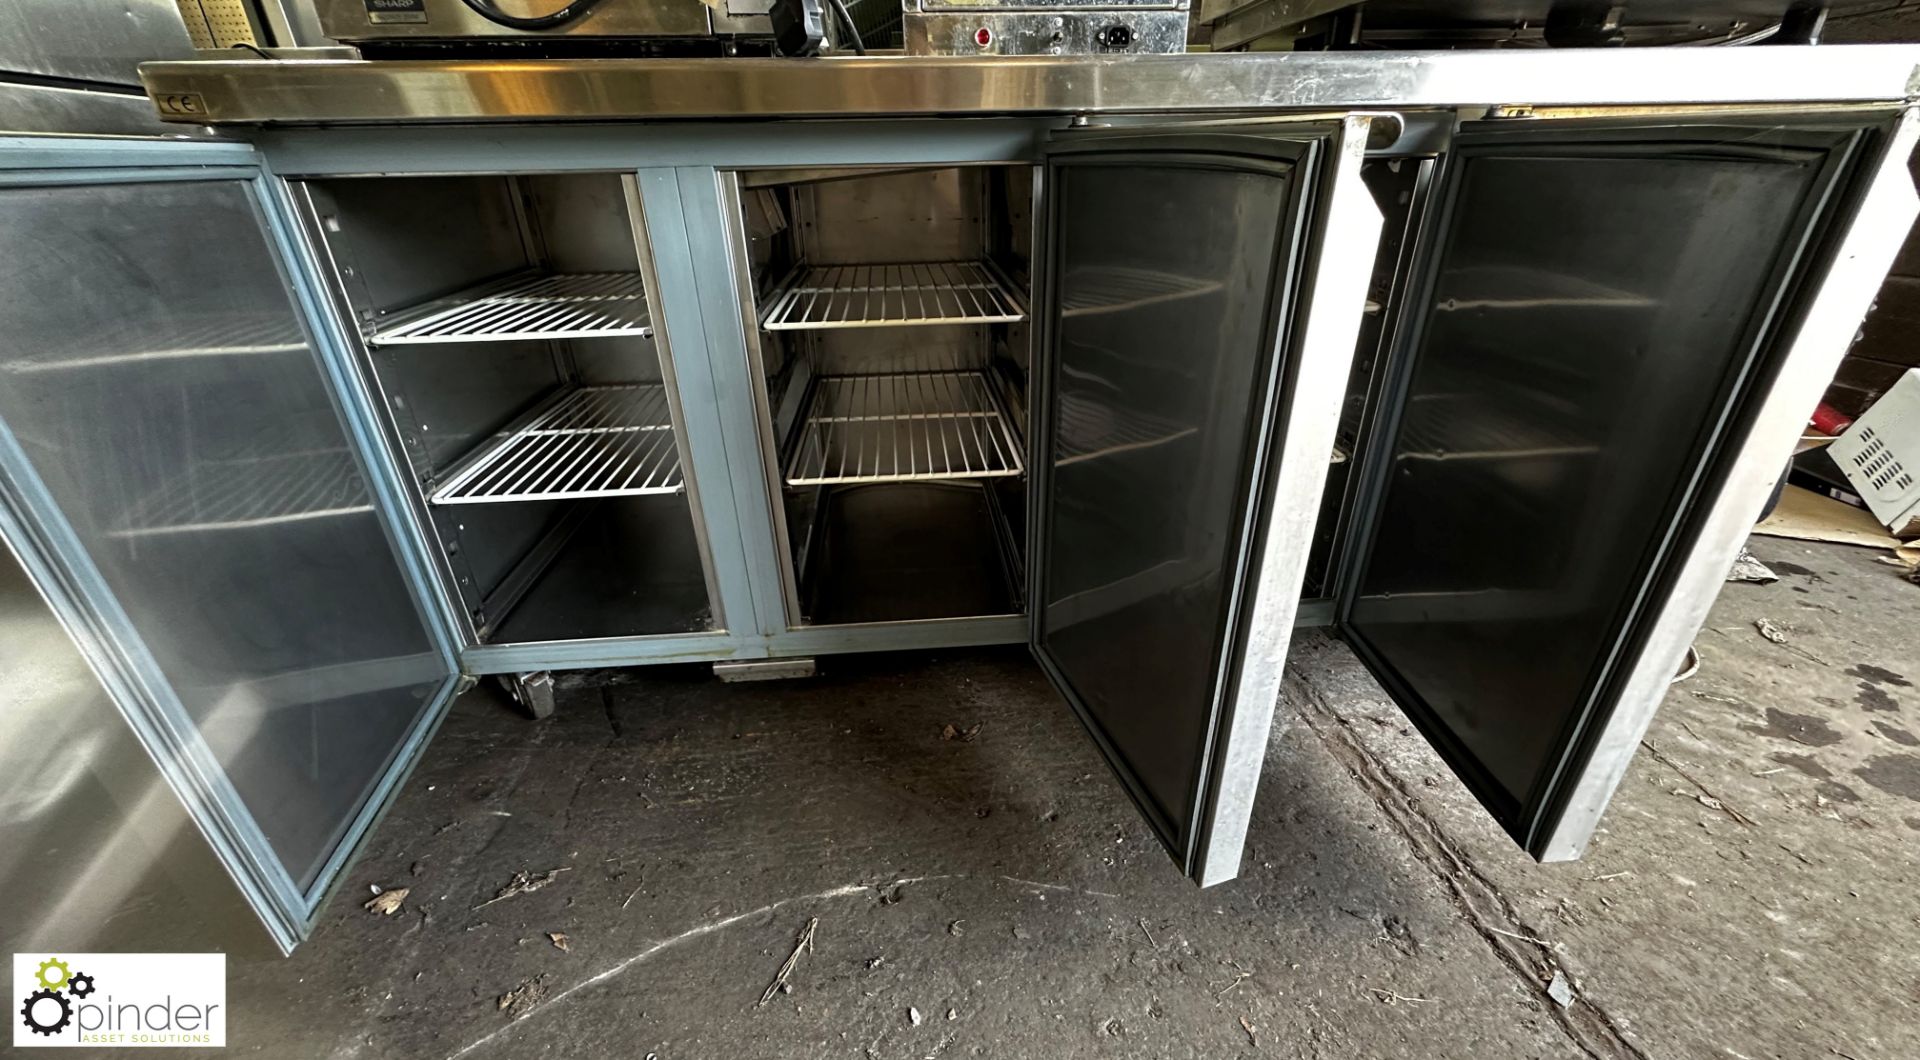 Stainless steel mobile 3-door Refrigerated Counter, 1880mm x 700mm x 860mm - Image 2 of 8